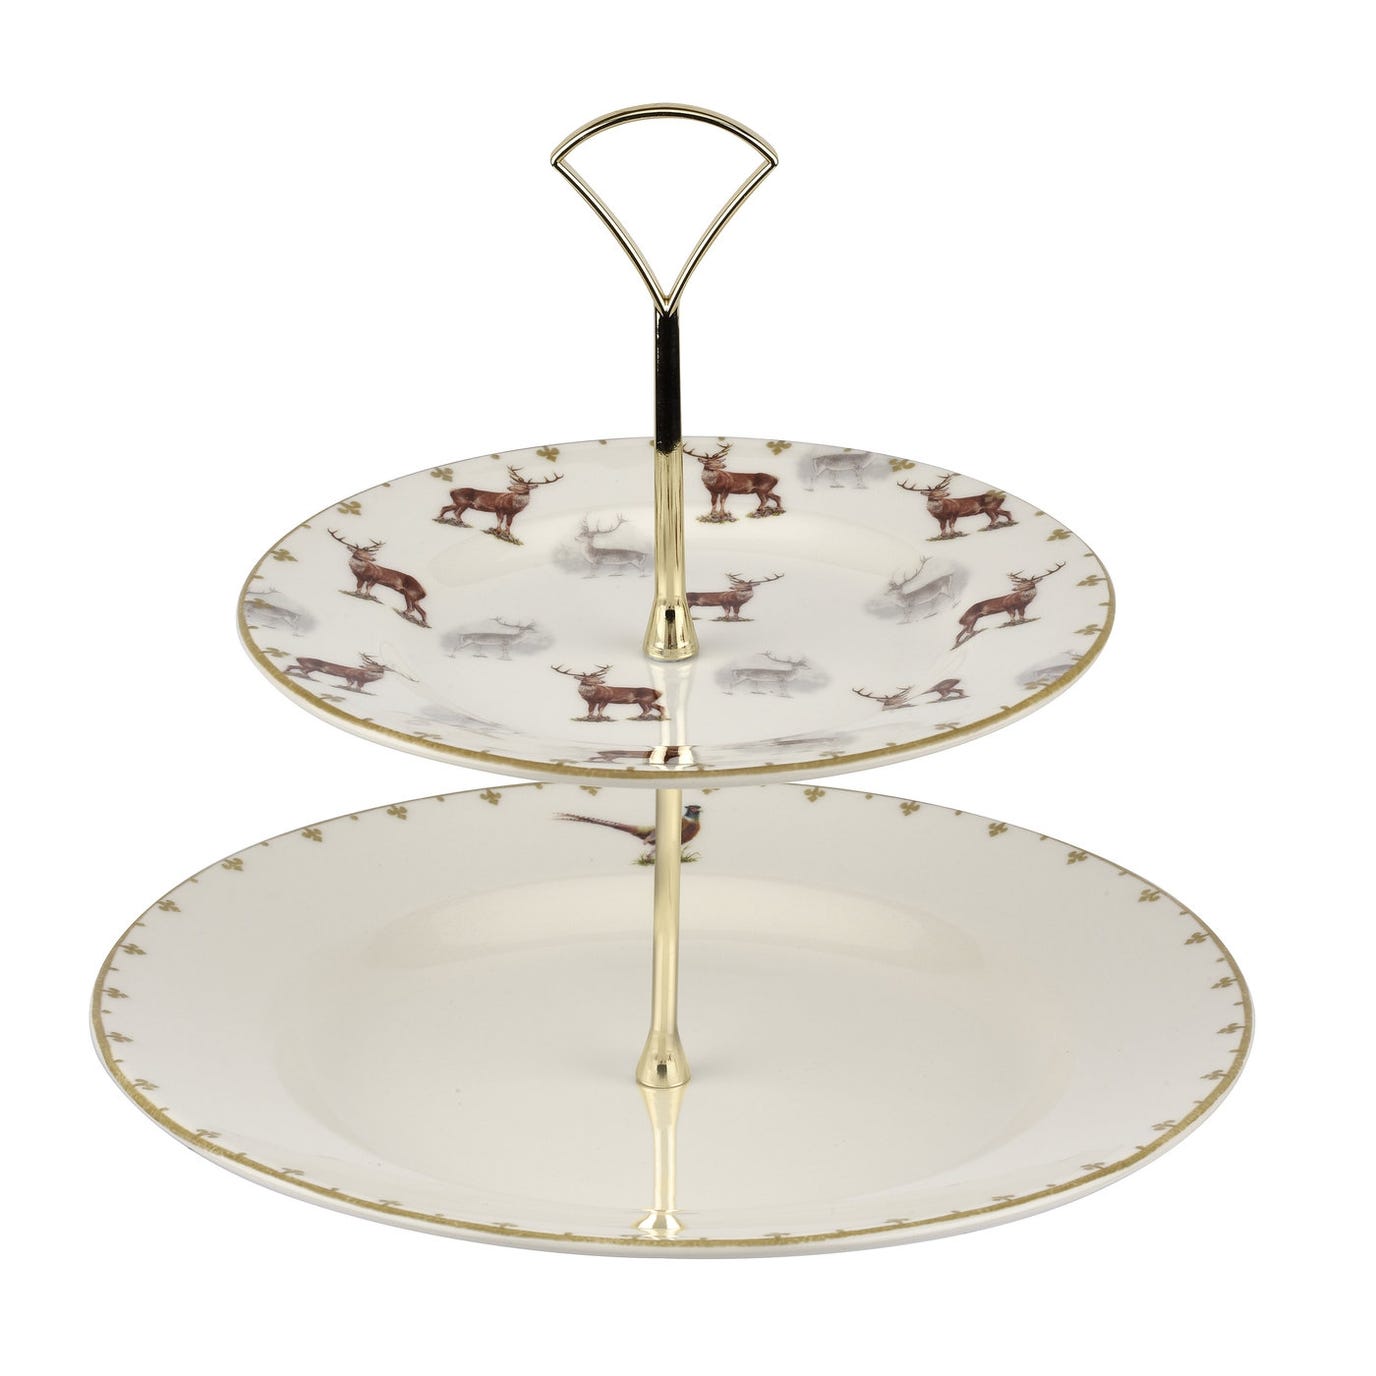 Seconds Spode Glen Lodge 2 Tier Cake Stand - No Guarantee of Stag or Pheasant Design